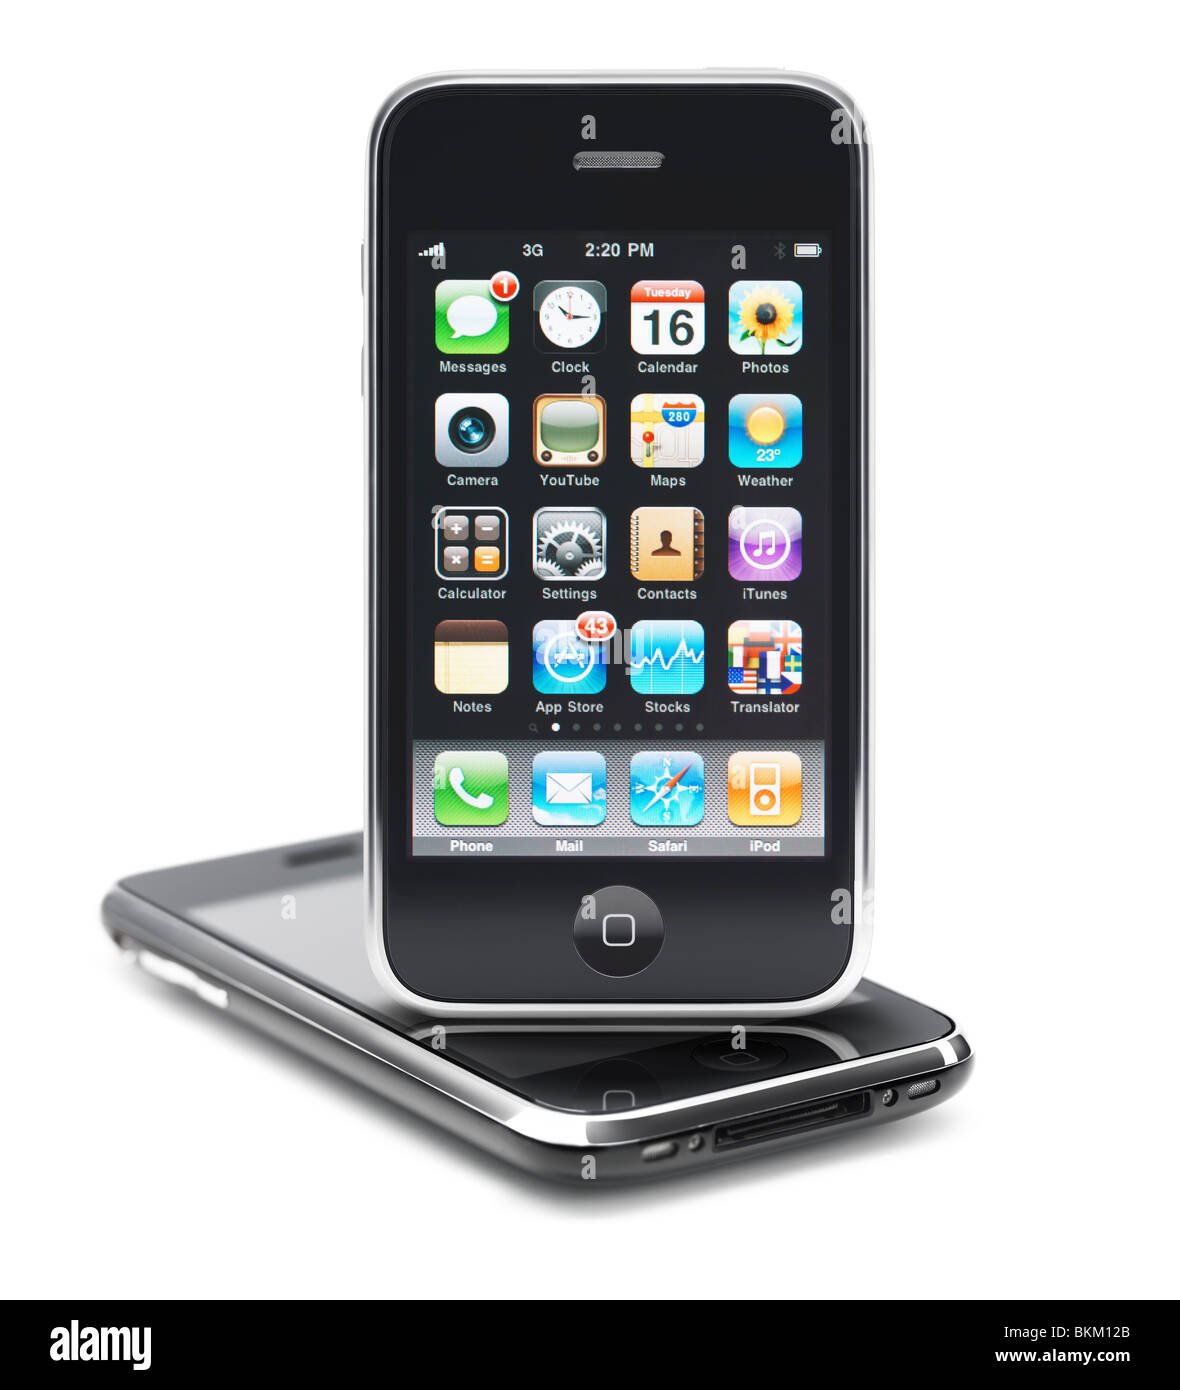 Apple iPhone 3Gs 3G smartphone with apps displayed on the screen isolated on white background. Stock Photo